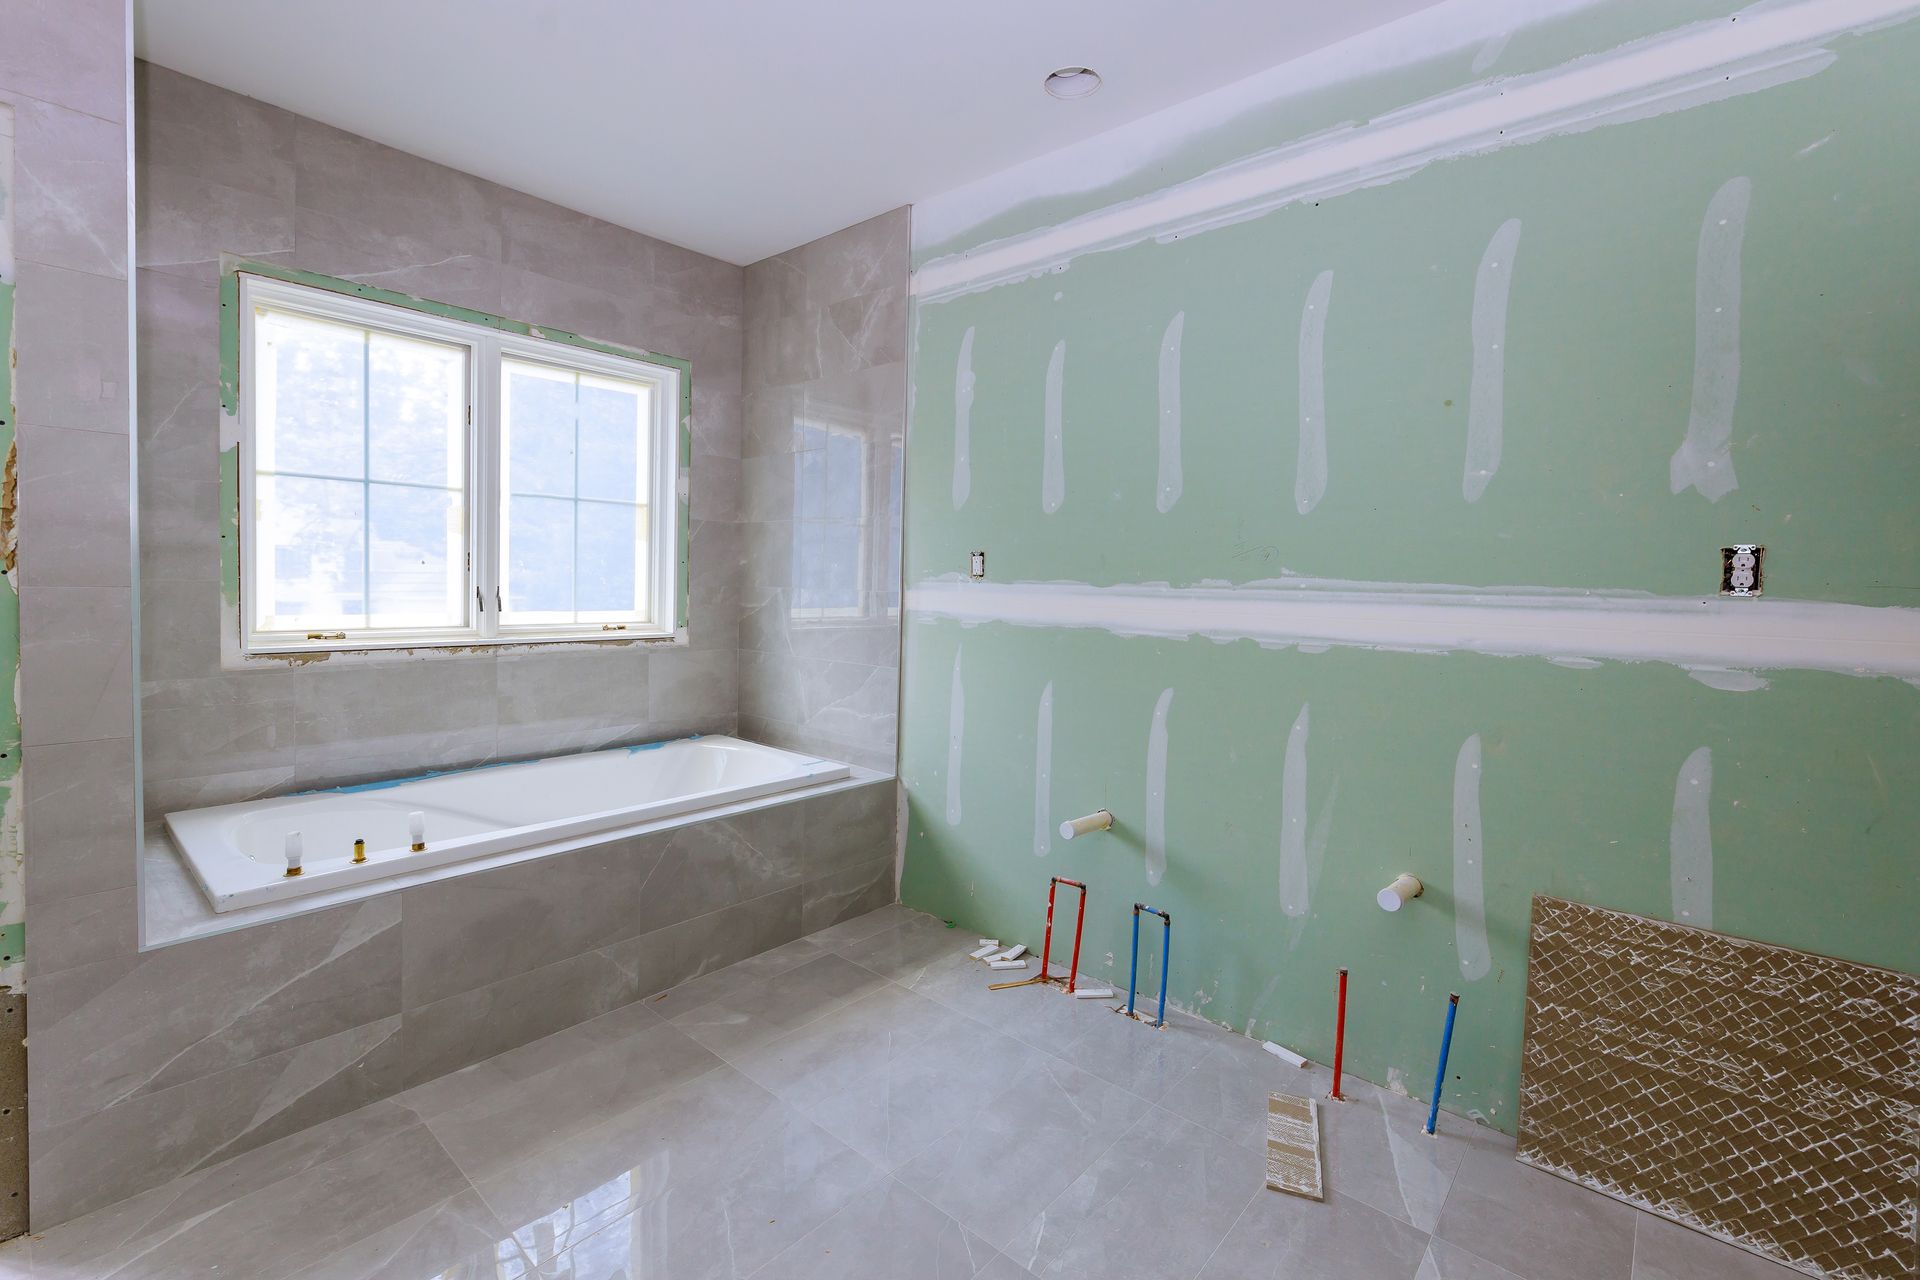 A bathroom under construction, showing a new bathtub being installed and plumbing pipes for new sinks.